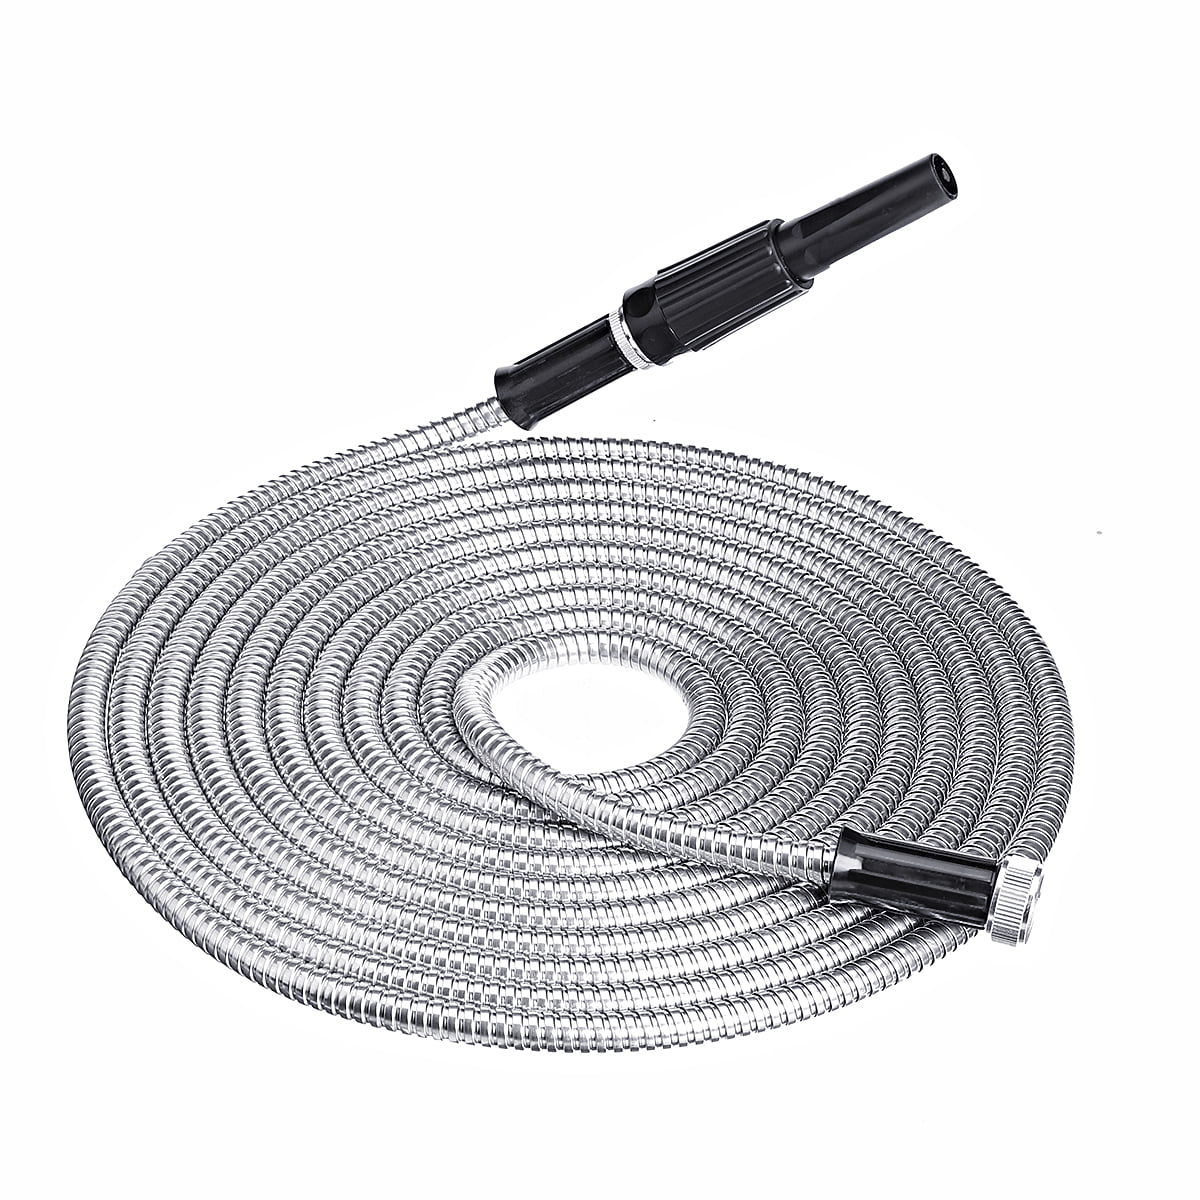 High Quality Stainless Steel Garden Water Hose Pipe 50/75/100FT Flexible Outdoor 